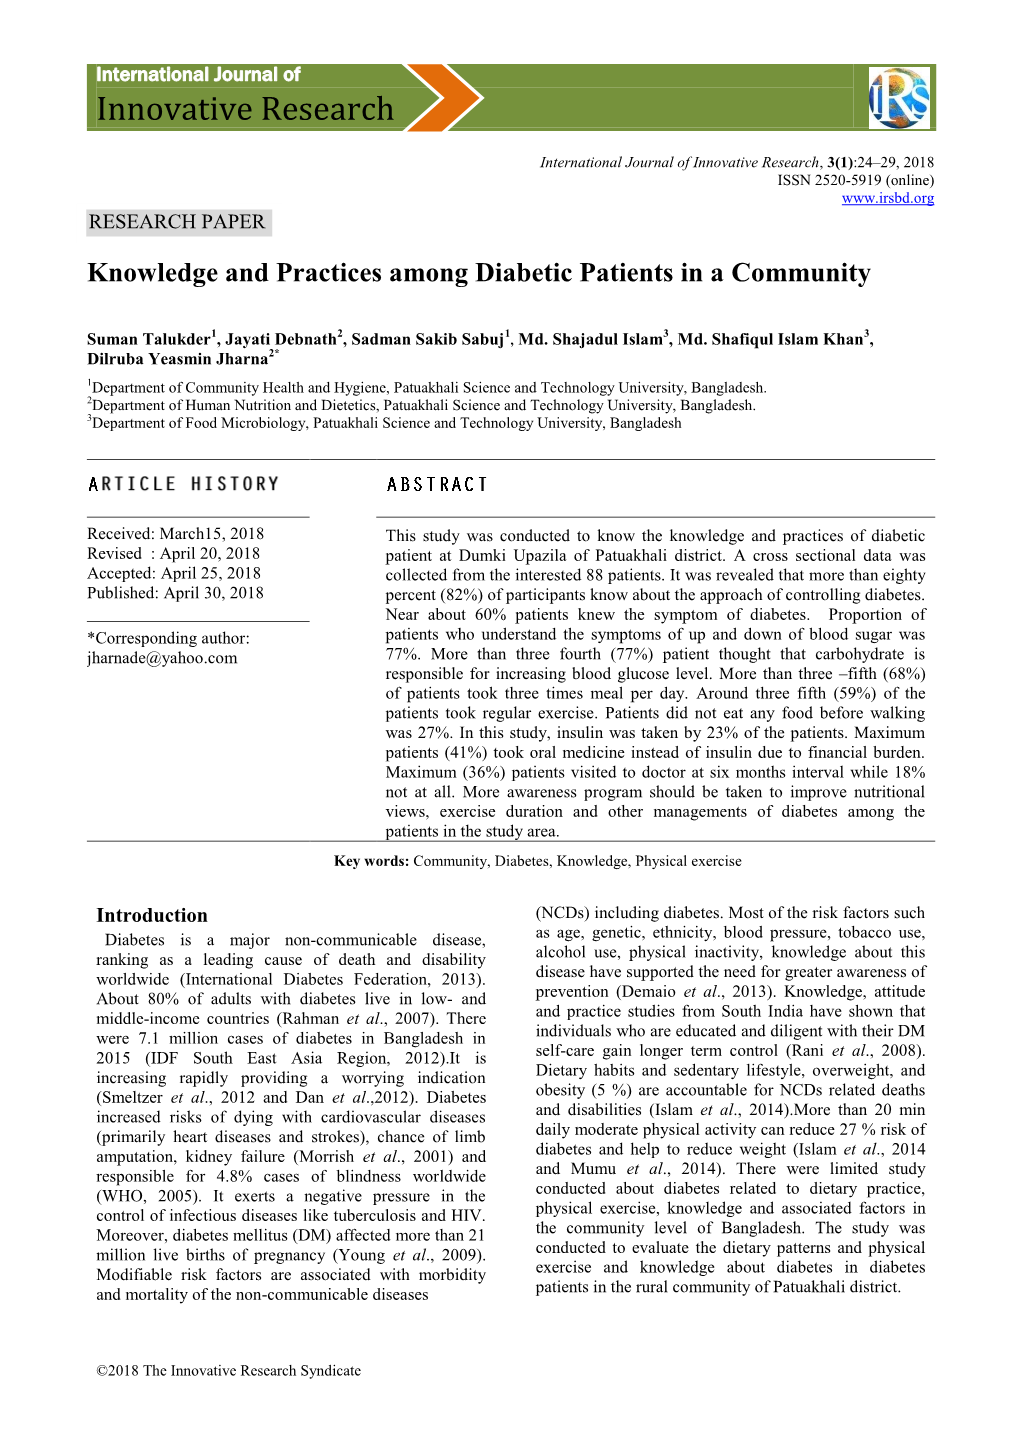 Knowledge and Practices Among Diabetic Patients in a Community